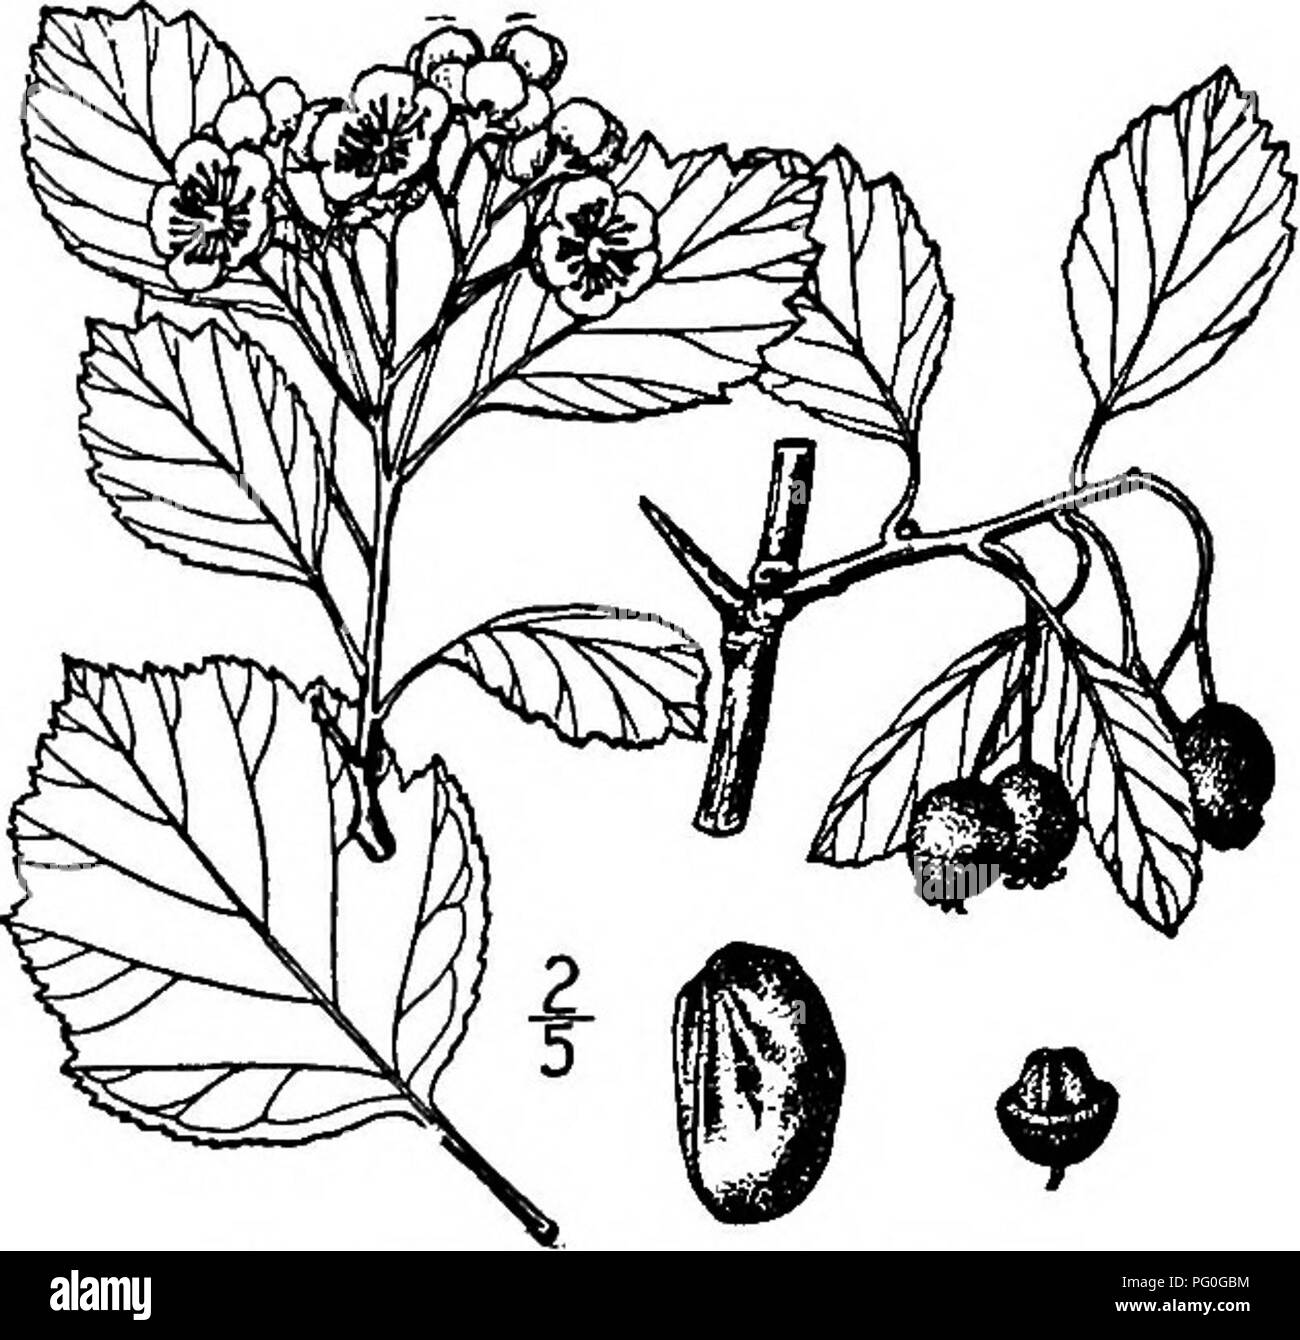 . North American trees : being descriptions and illustrations of the trees growing independently of cultivation in North America, north of Mexico and the West Indies . Trees. Nuttall's Thorn 481 The leaves are ovate or obovate to broadly ovate, 2 to 7 cm. long, i to 6 cm. wide, pointed or short-pointed at apex, wedge-shaped at base, doubly toothed and lobed, covered with pale hairs, particularly along the veins above, dark green above, half-leathery, seldom becoming smooth along the veins; leaf-stalks slightly winged, hairy, glandular, i to 3 cm. long. The flowers are about 15 mm. wide, in man Stock Photo